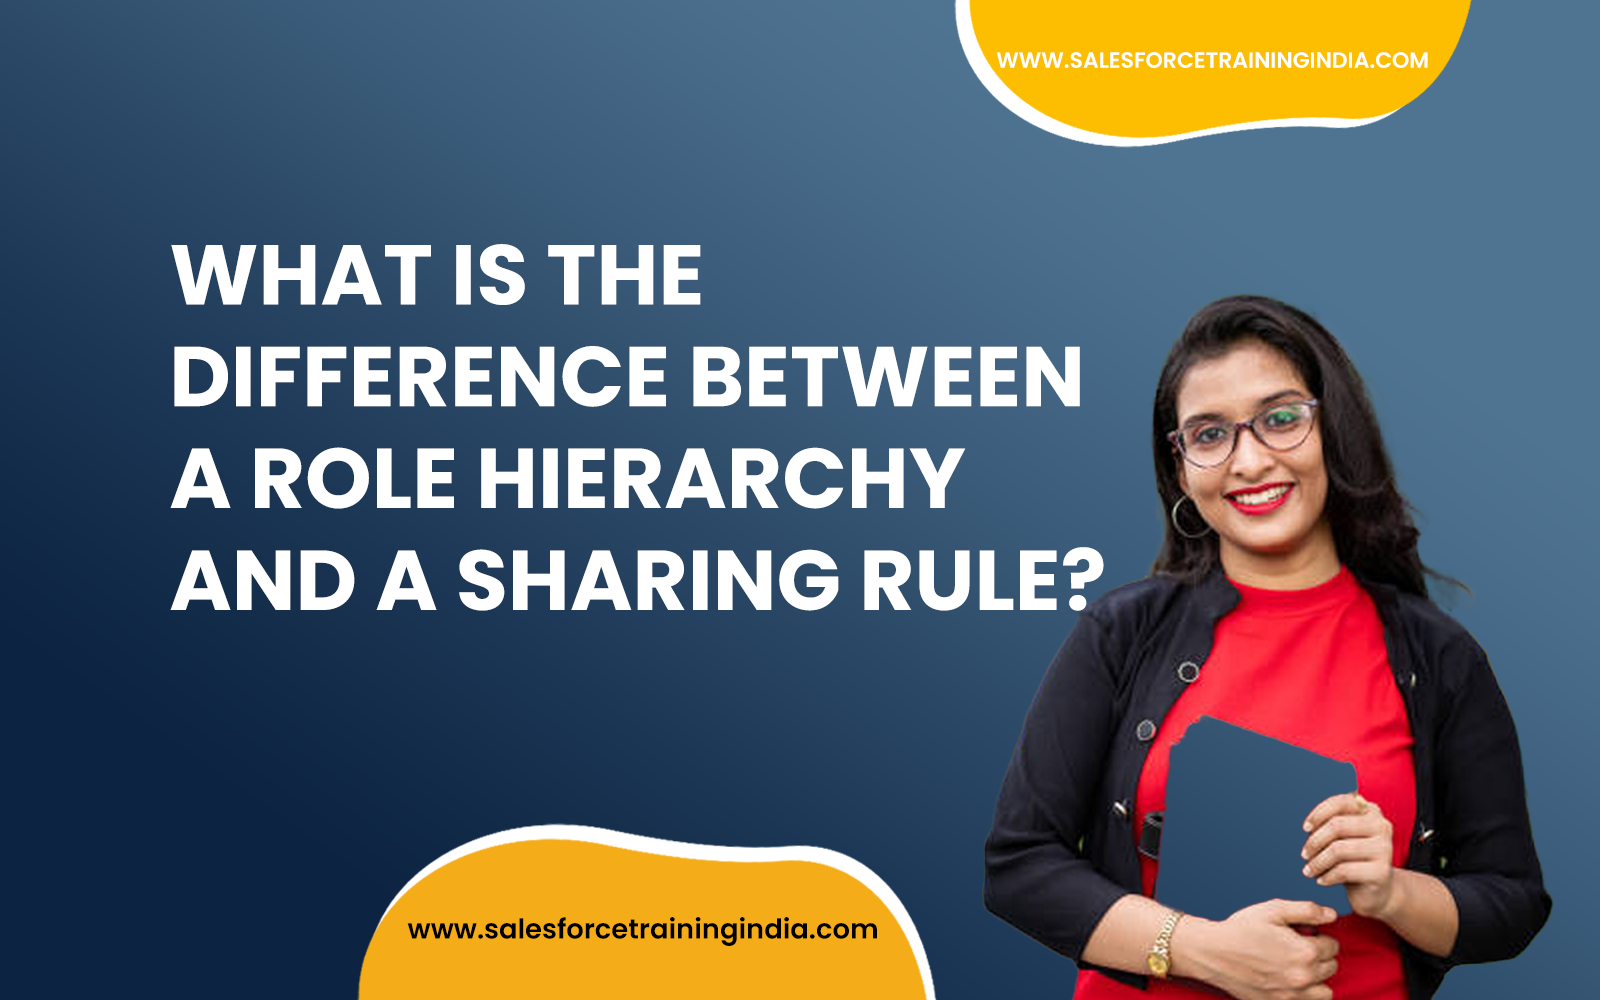 What is the difference between a role hierarchy and a sharing rule?